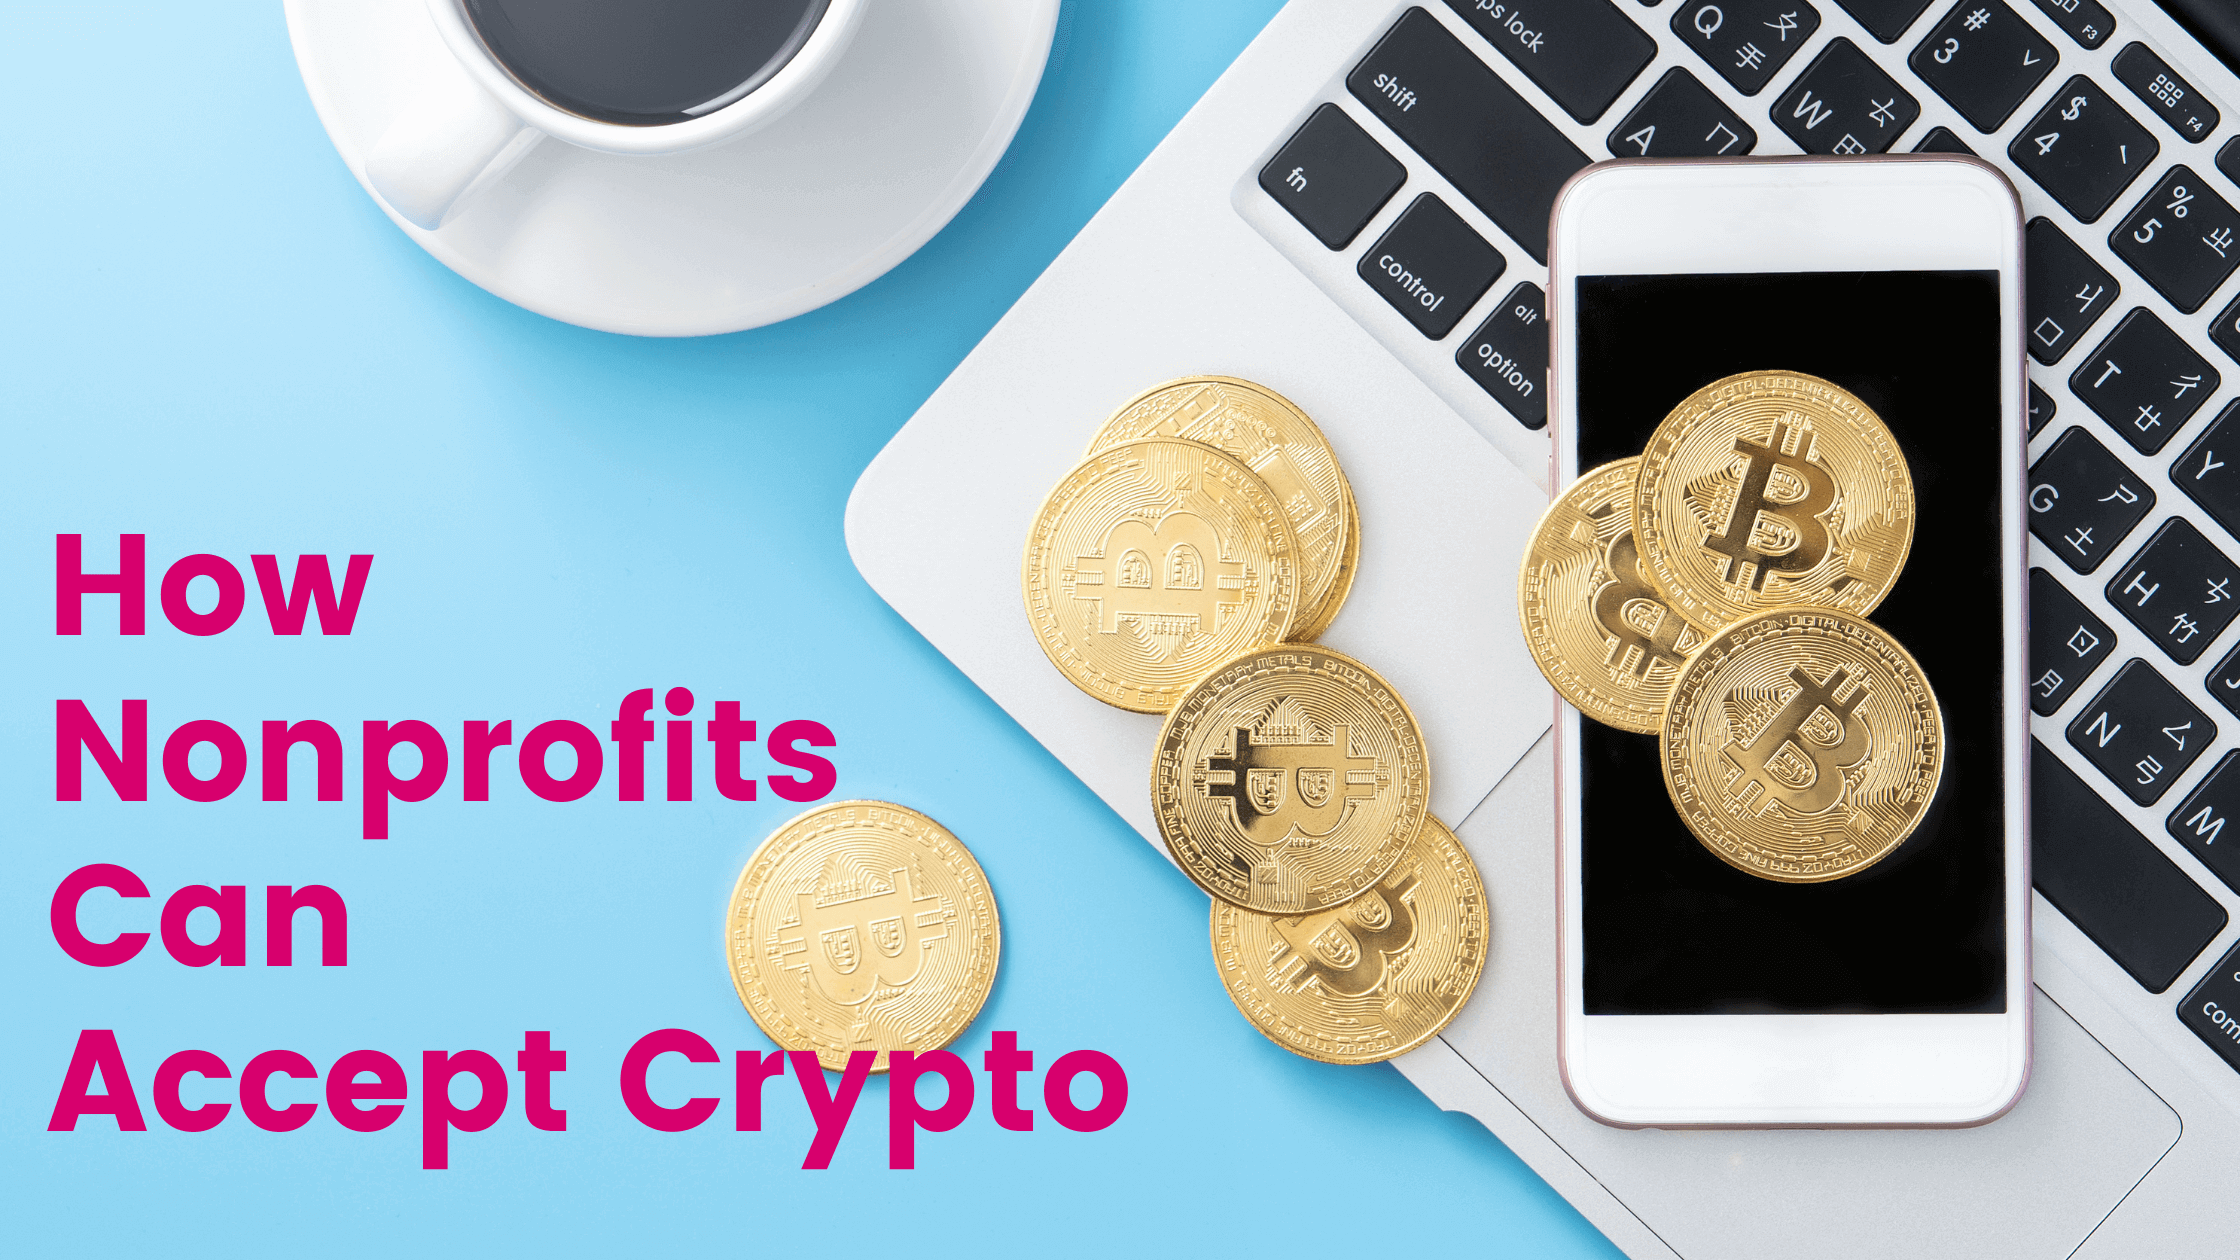 'How nonprofits can accept crypto' in pink with bitcoins on iPhone and MacBook. Coffee mug sitting by computer